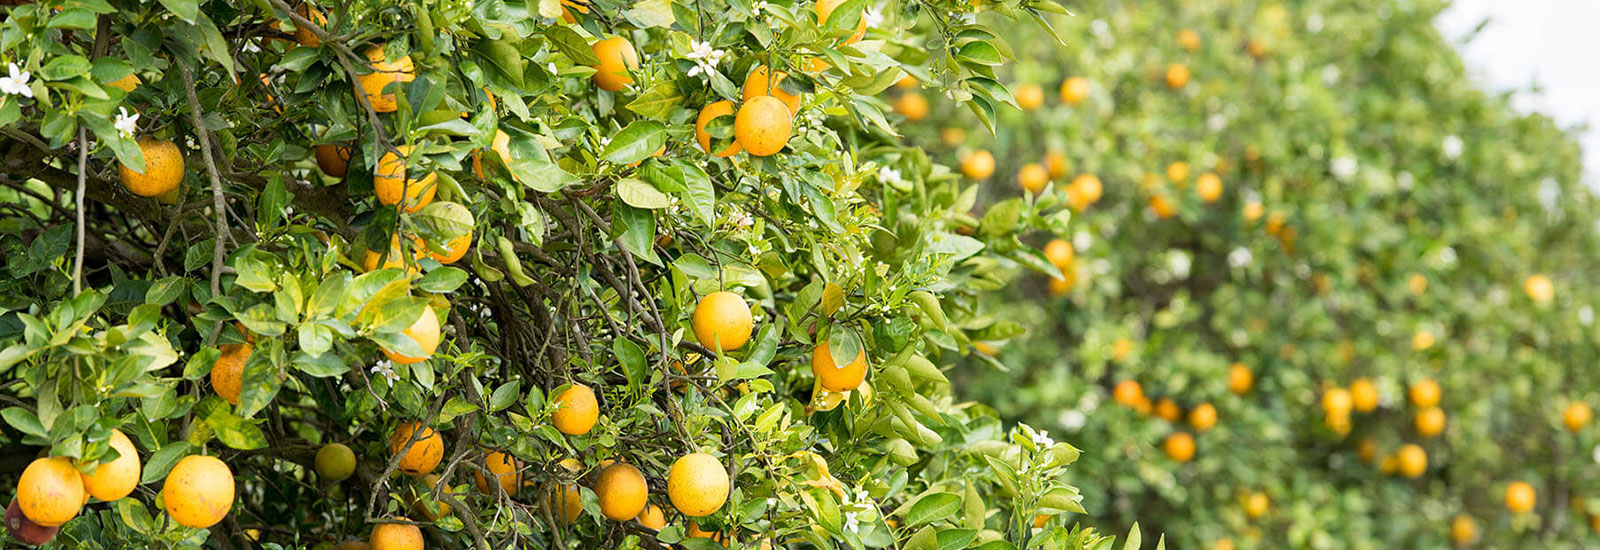 DETERMINATION OF CLAS SIGNAL AND TRANSMISSION PROPERTIES OF HLB IN CITRUS TREES